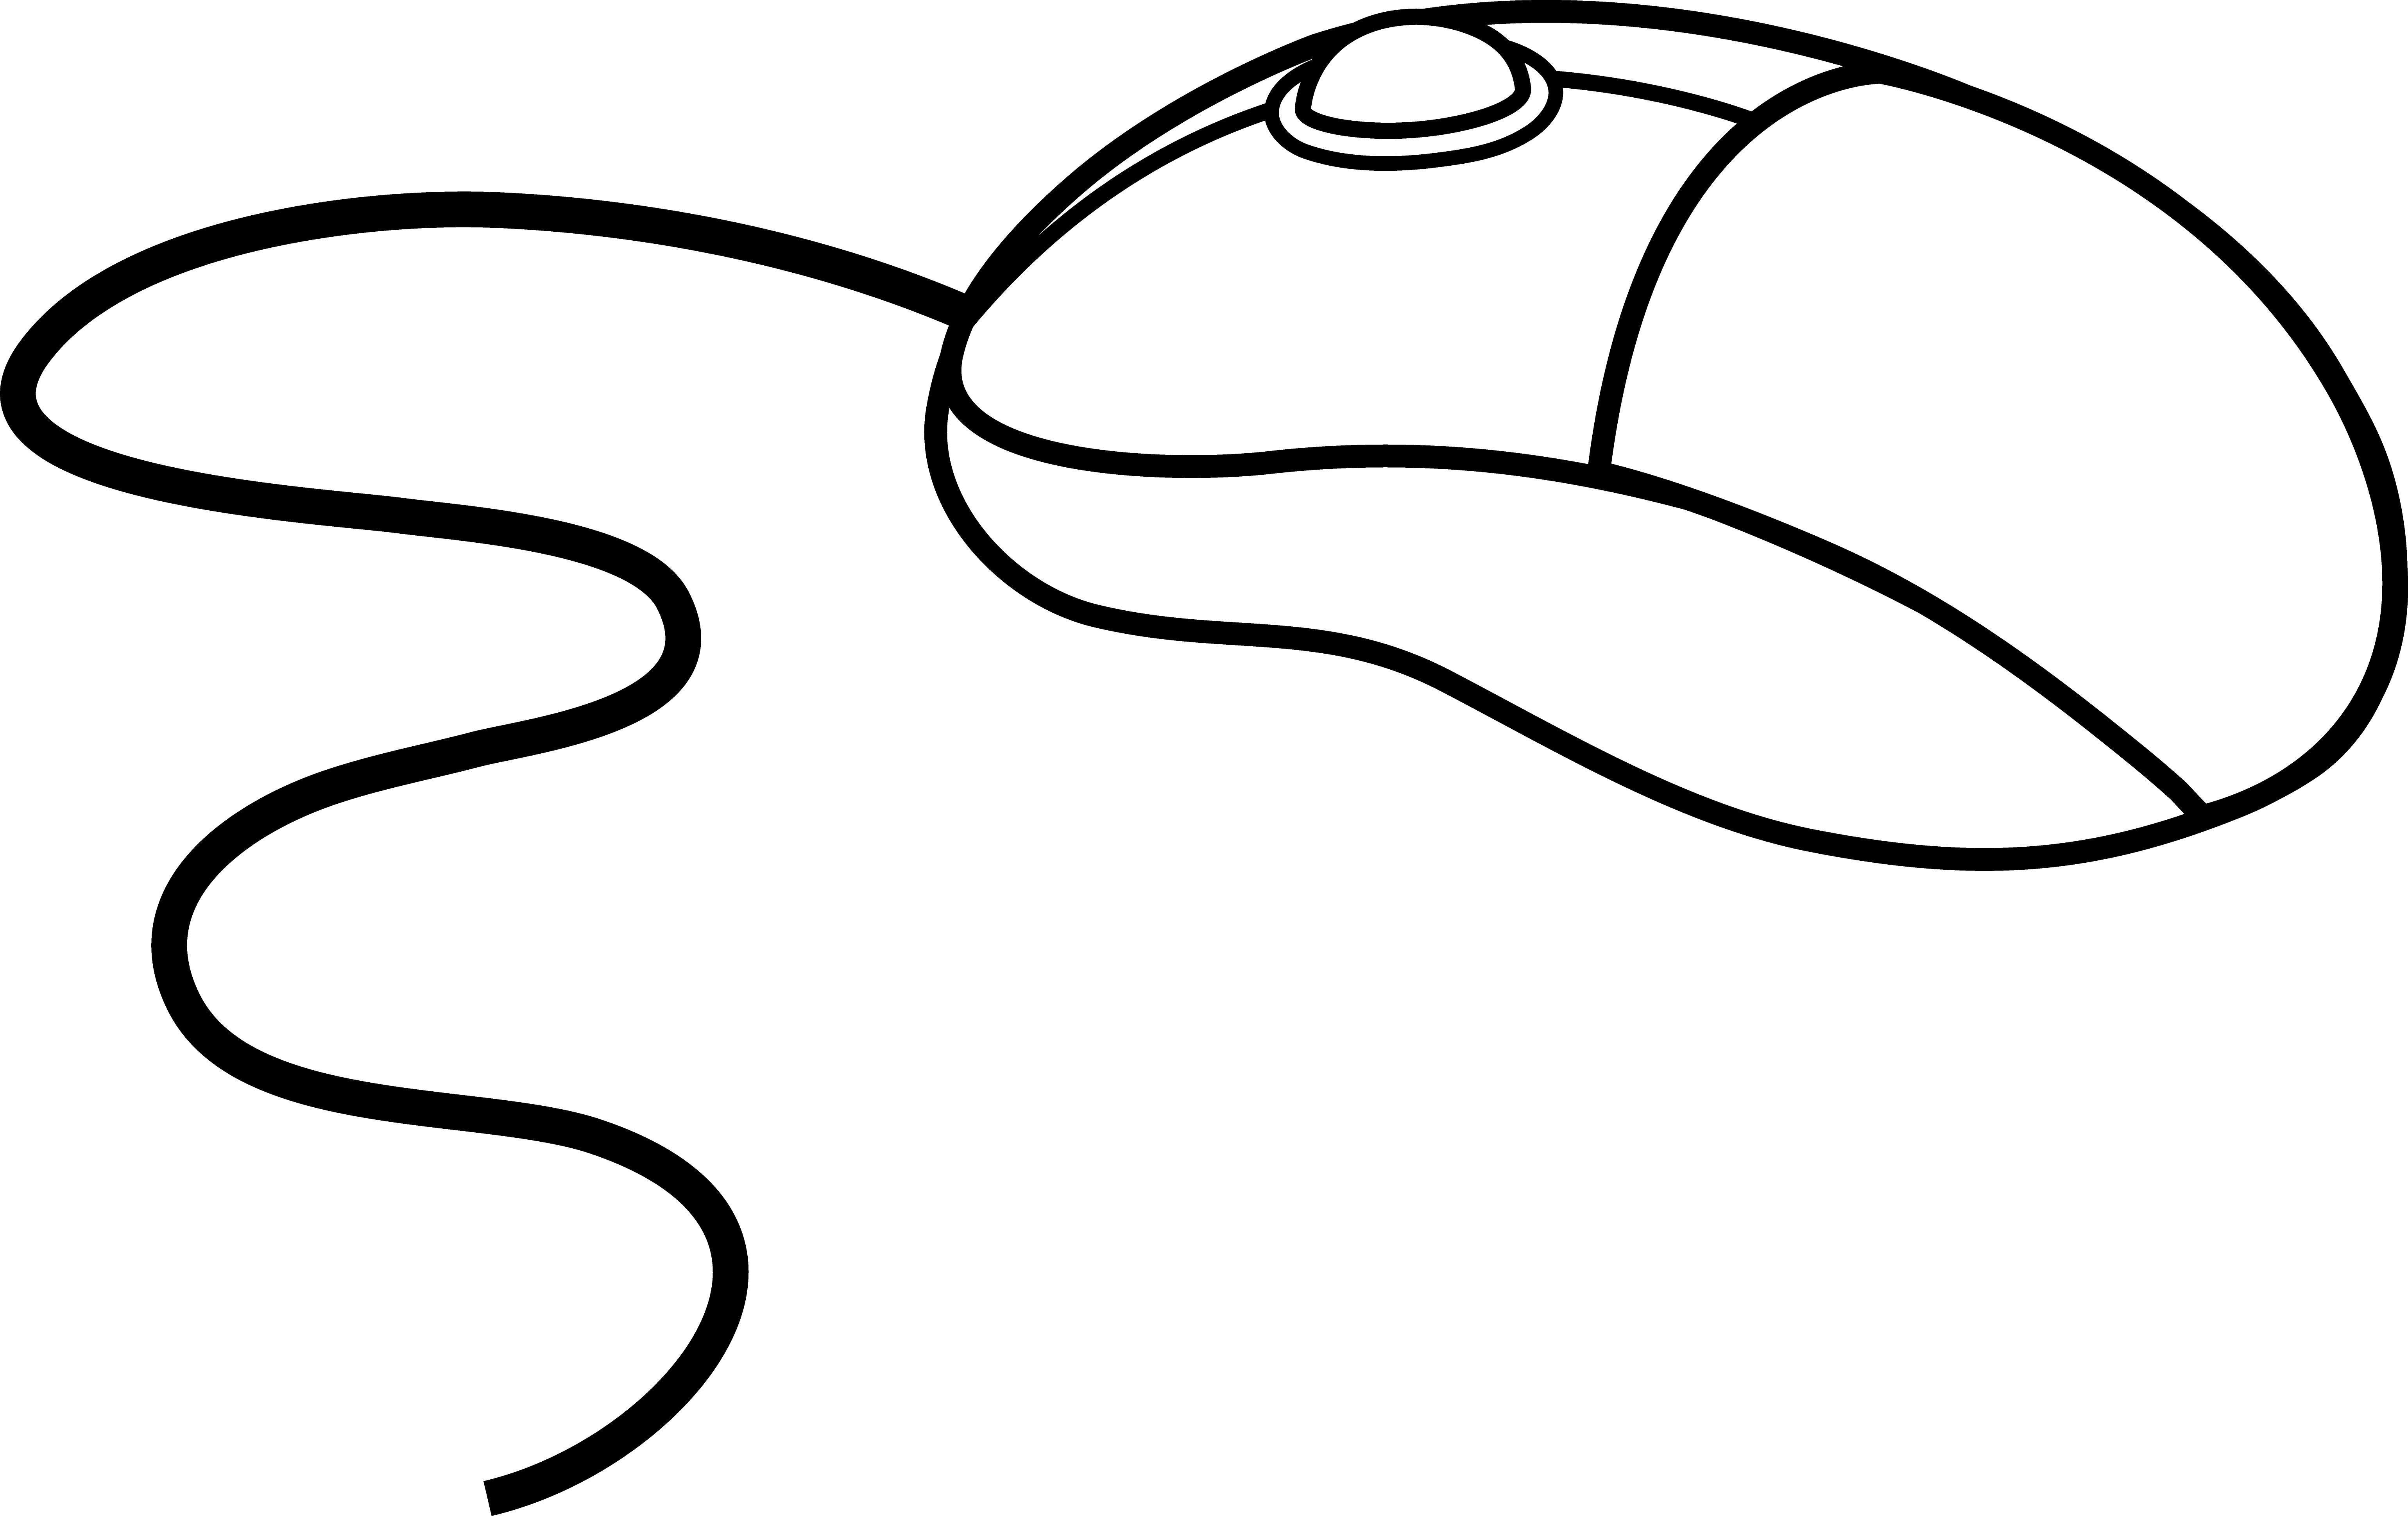 Computer mouse clipart black and white free 2